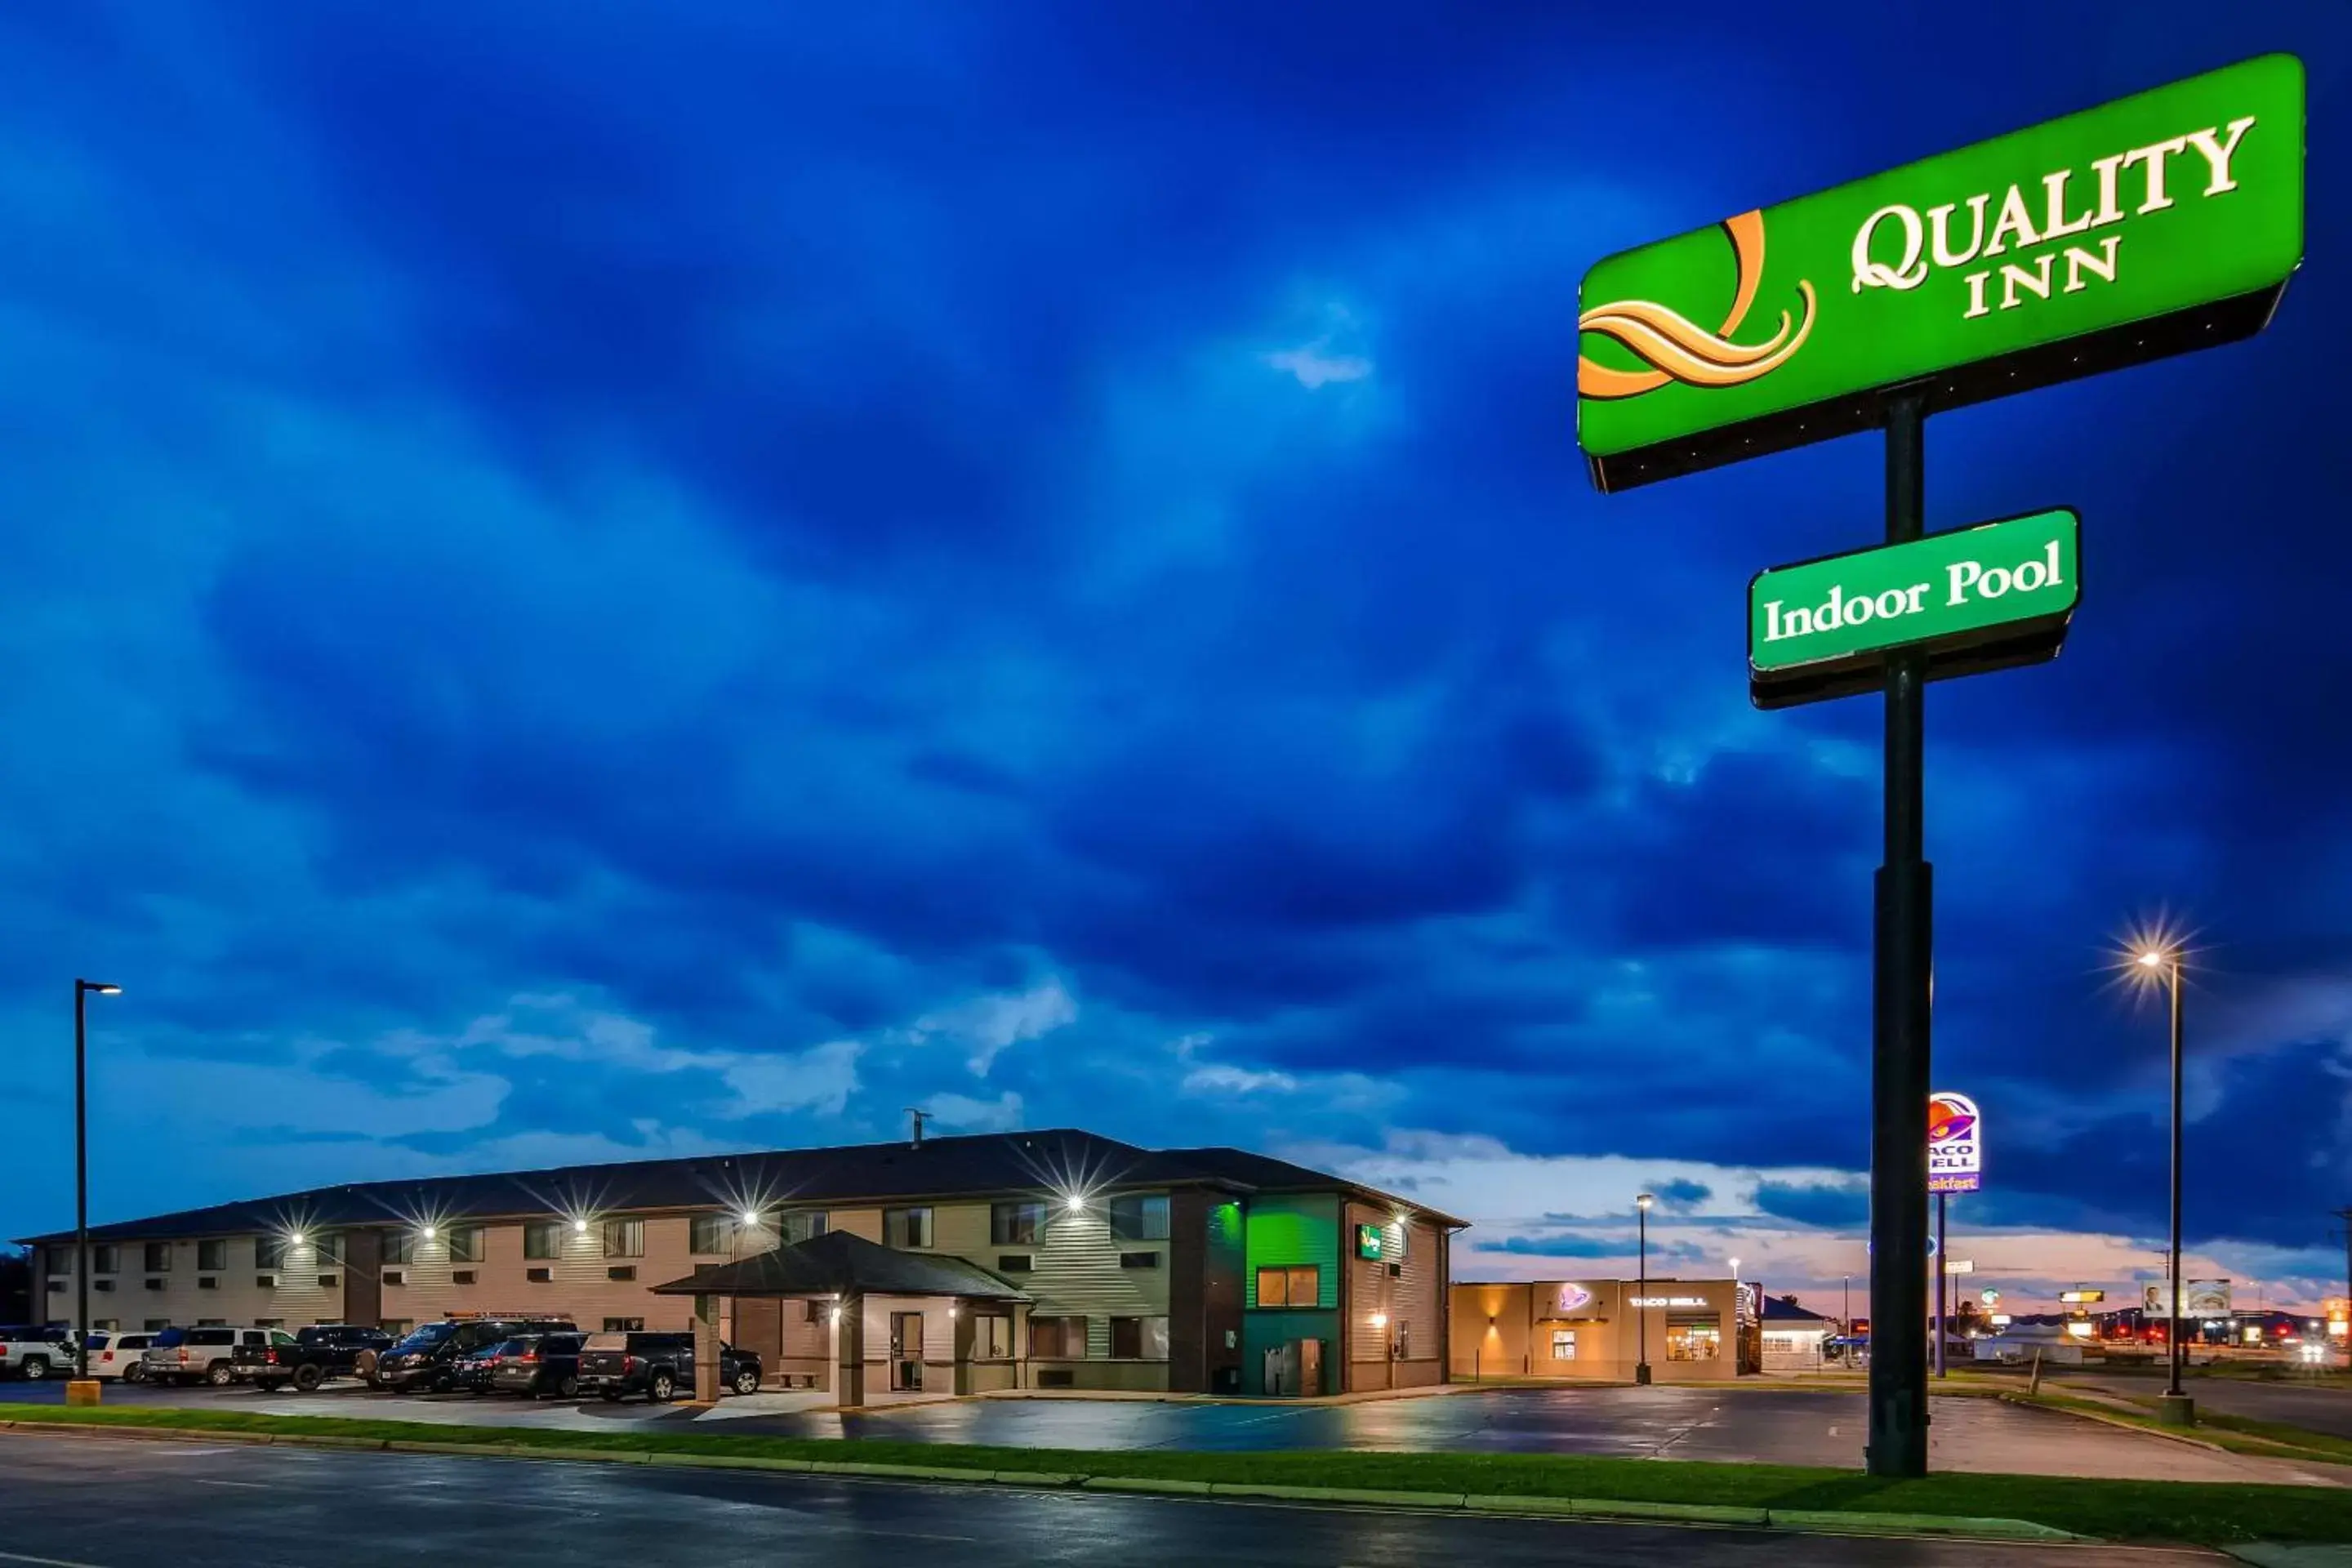 Property building in Quality Inn Tomah